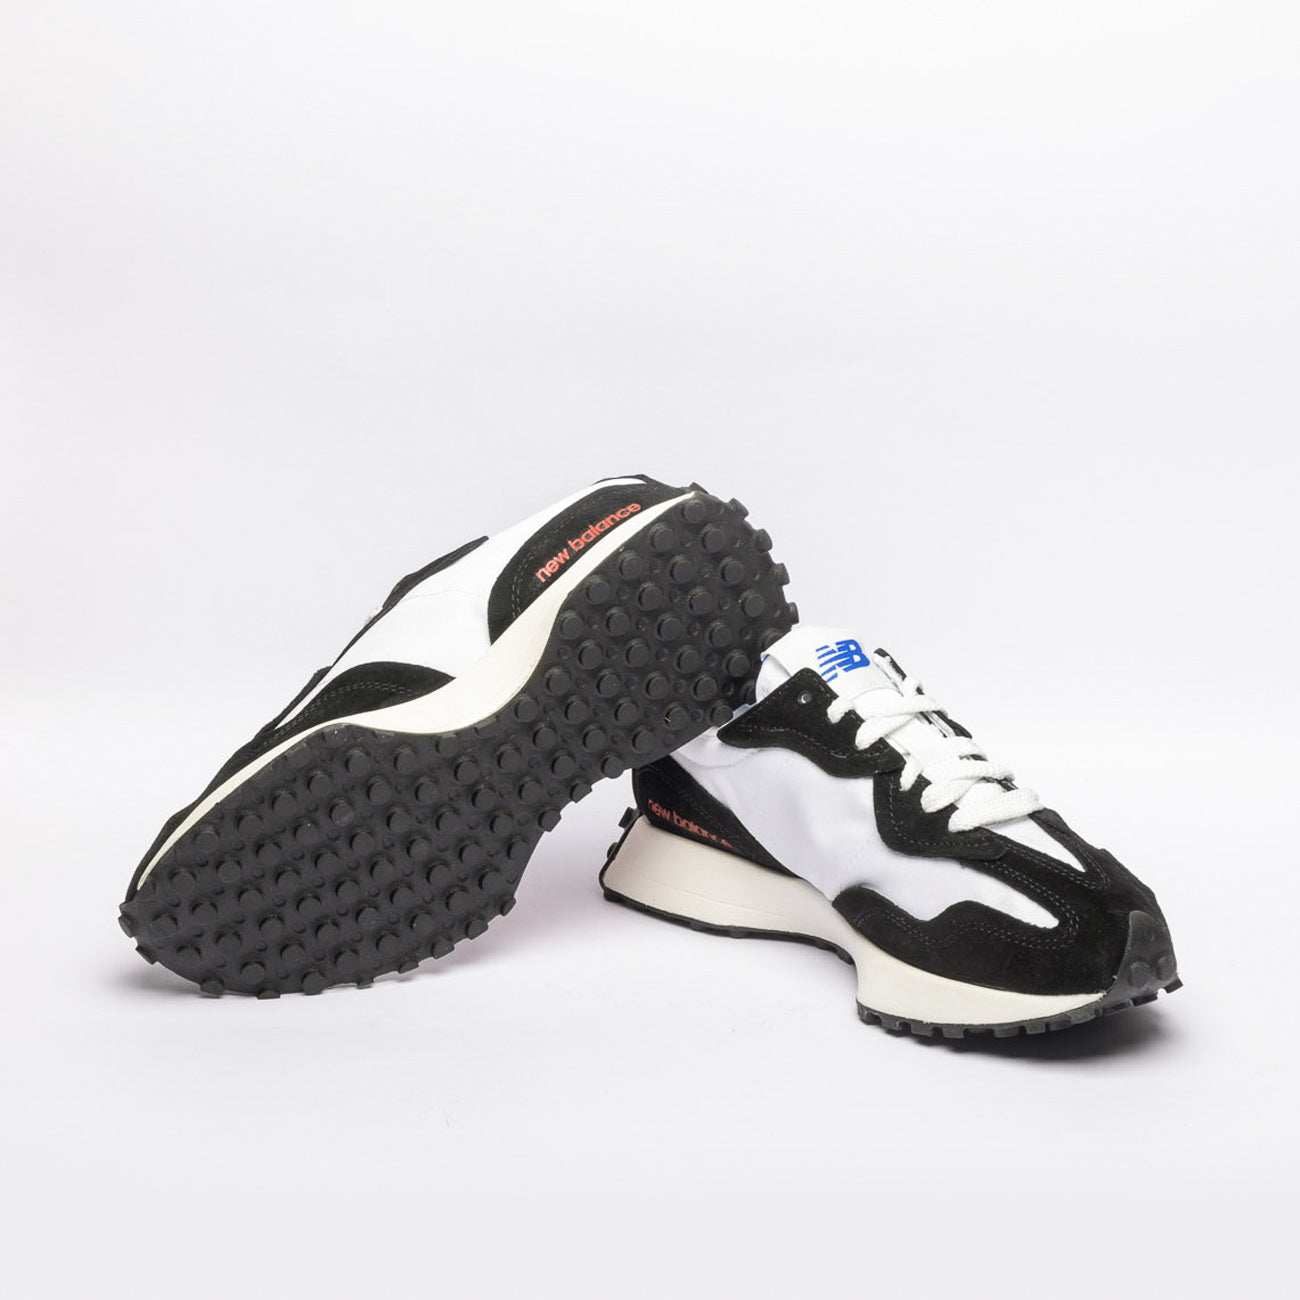 New Balance 327 white fabric and black suede running sneaker